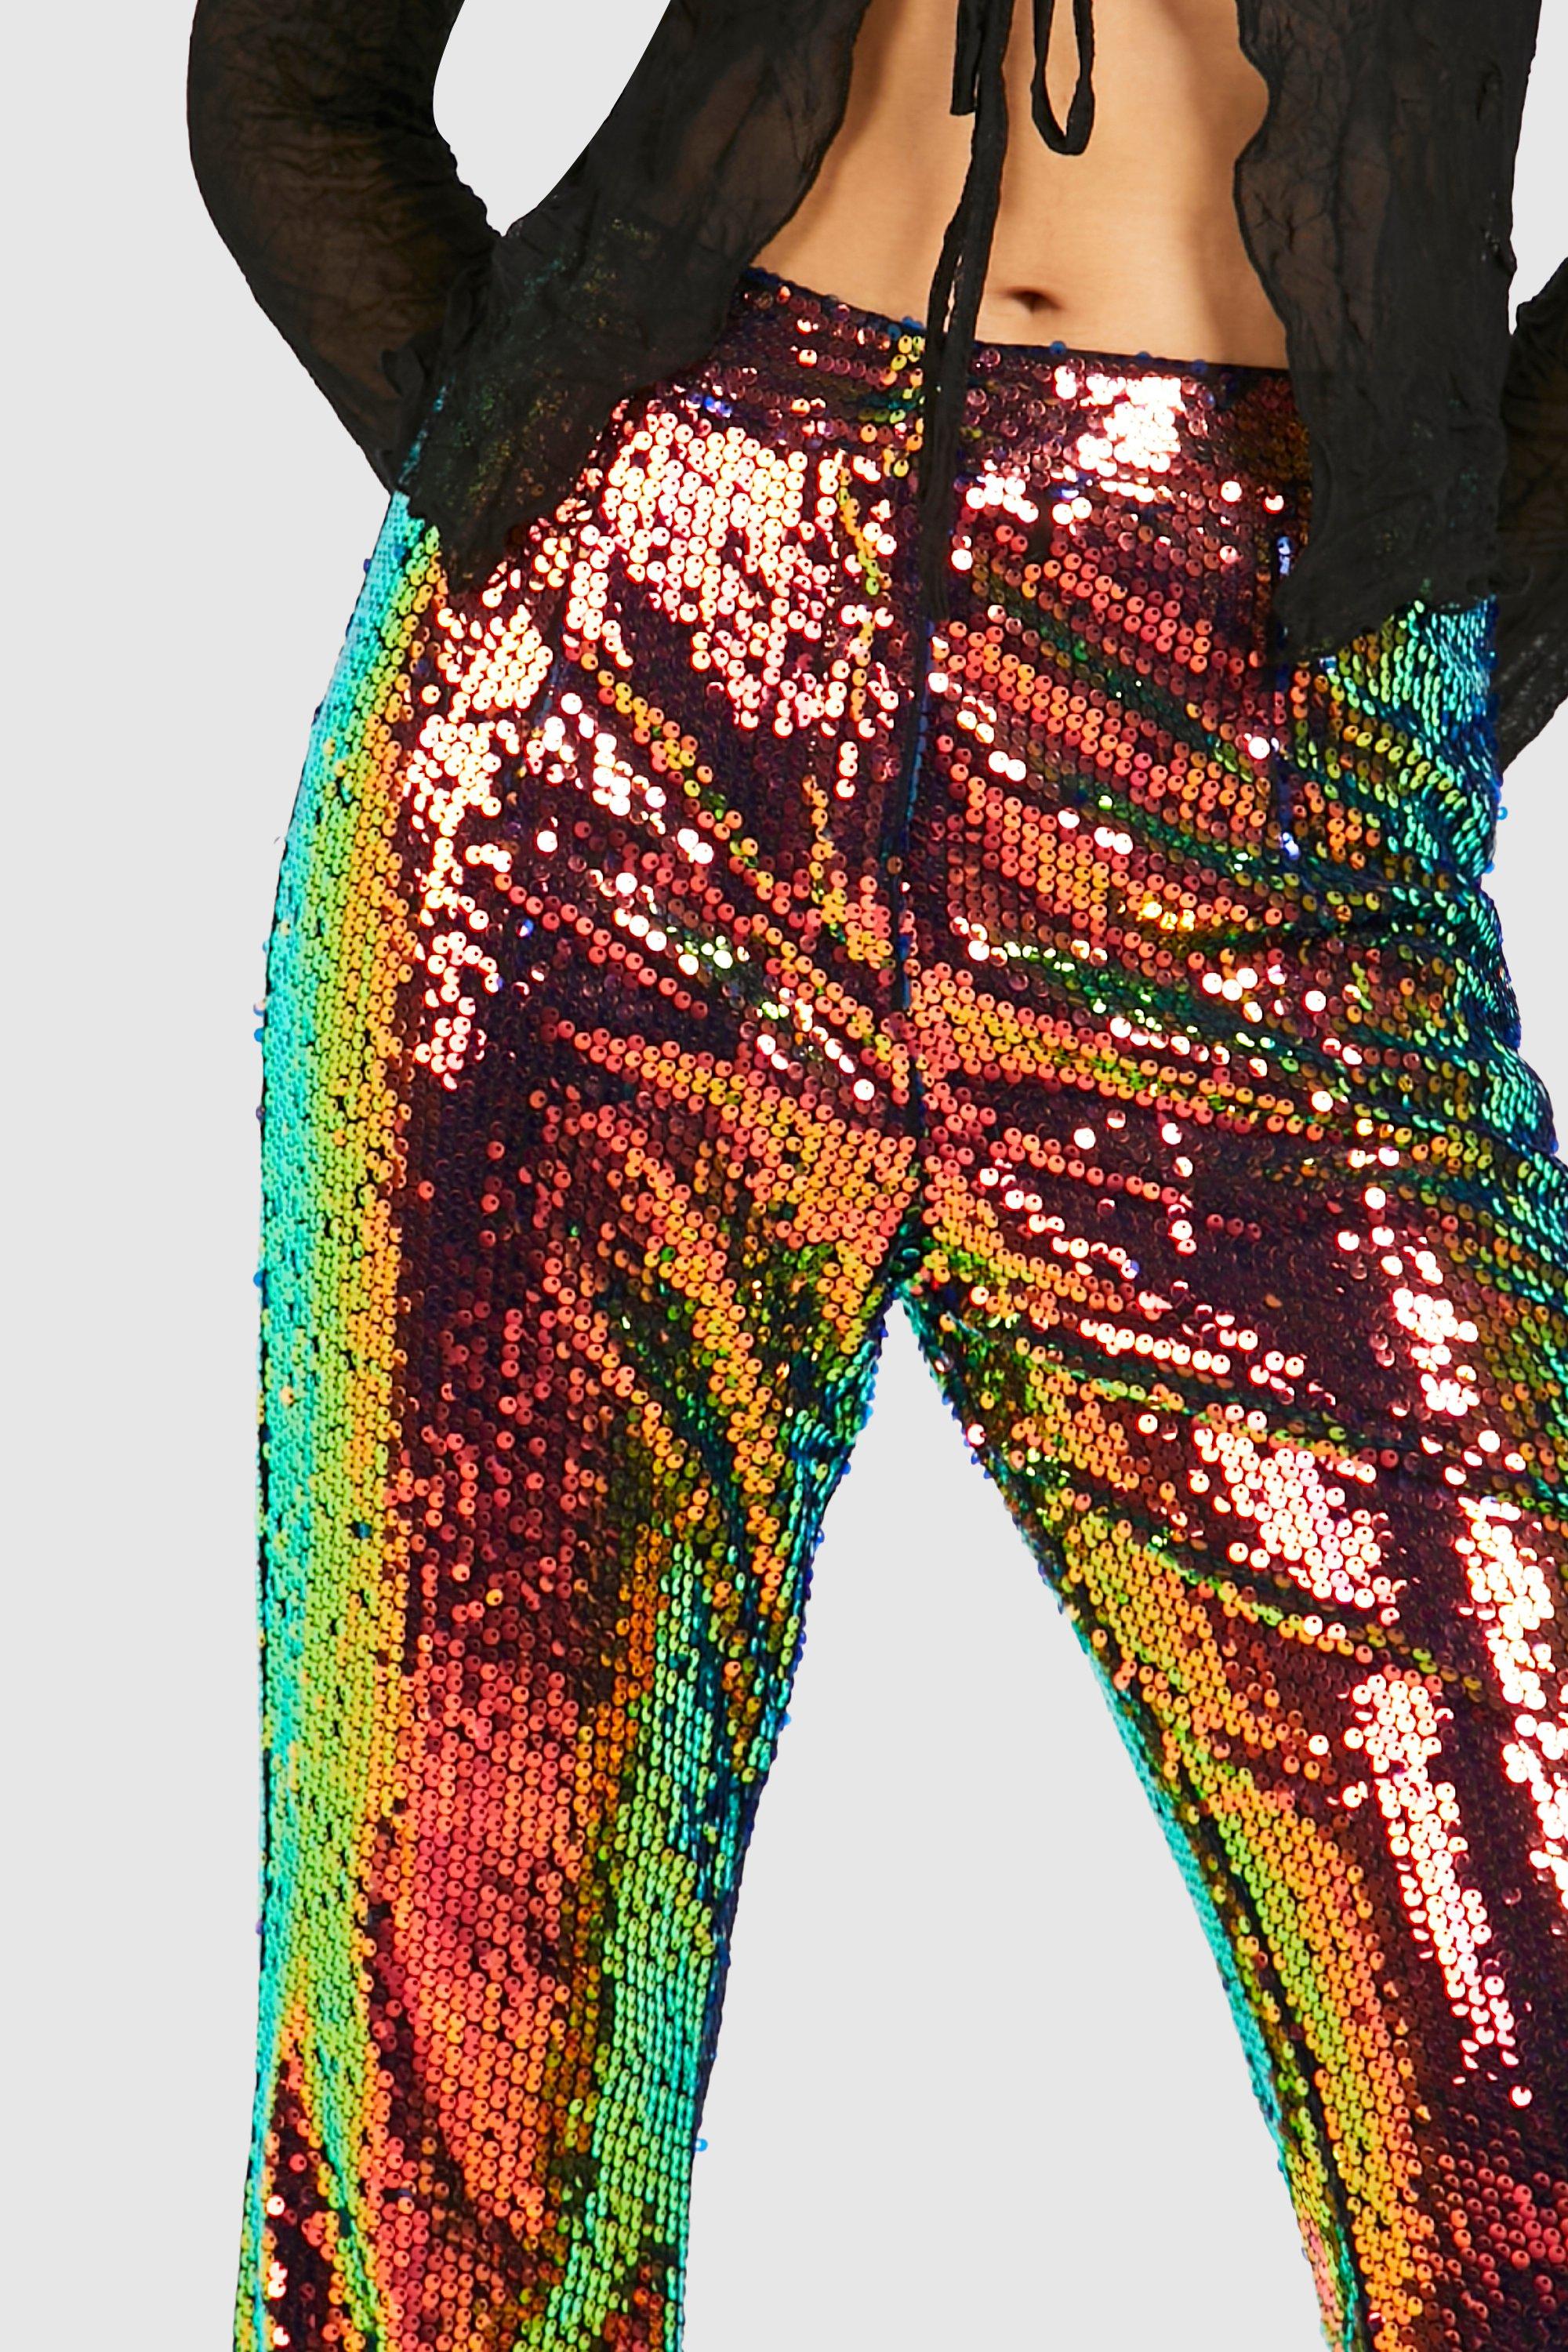 Express High Waisted Sequin Leggings  Sequin leggings, Clothes, Colorful  leggings